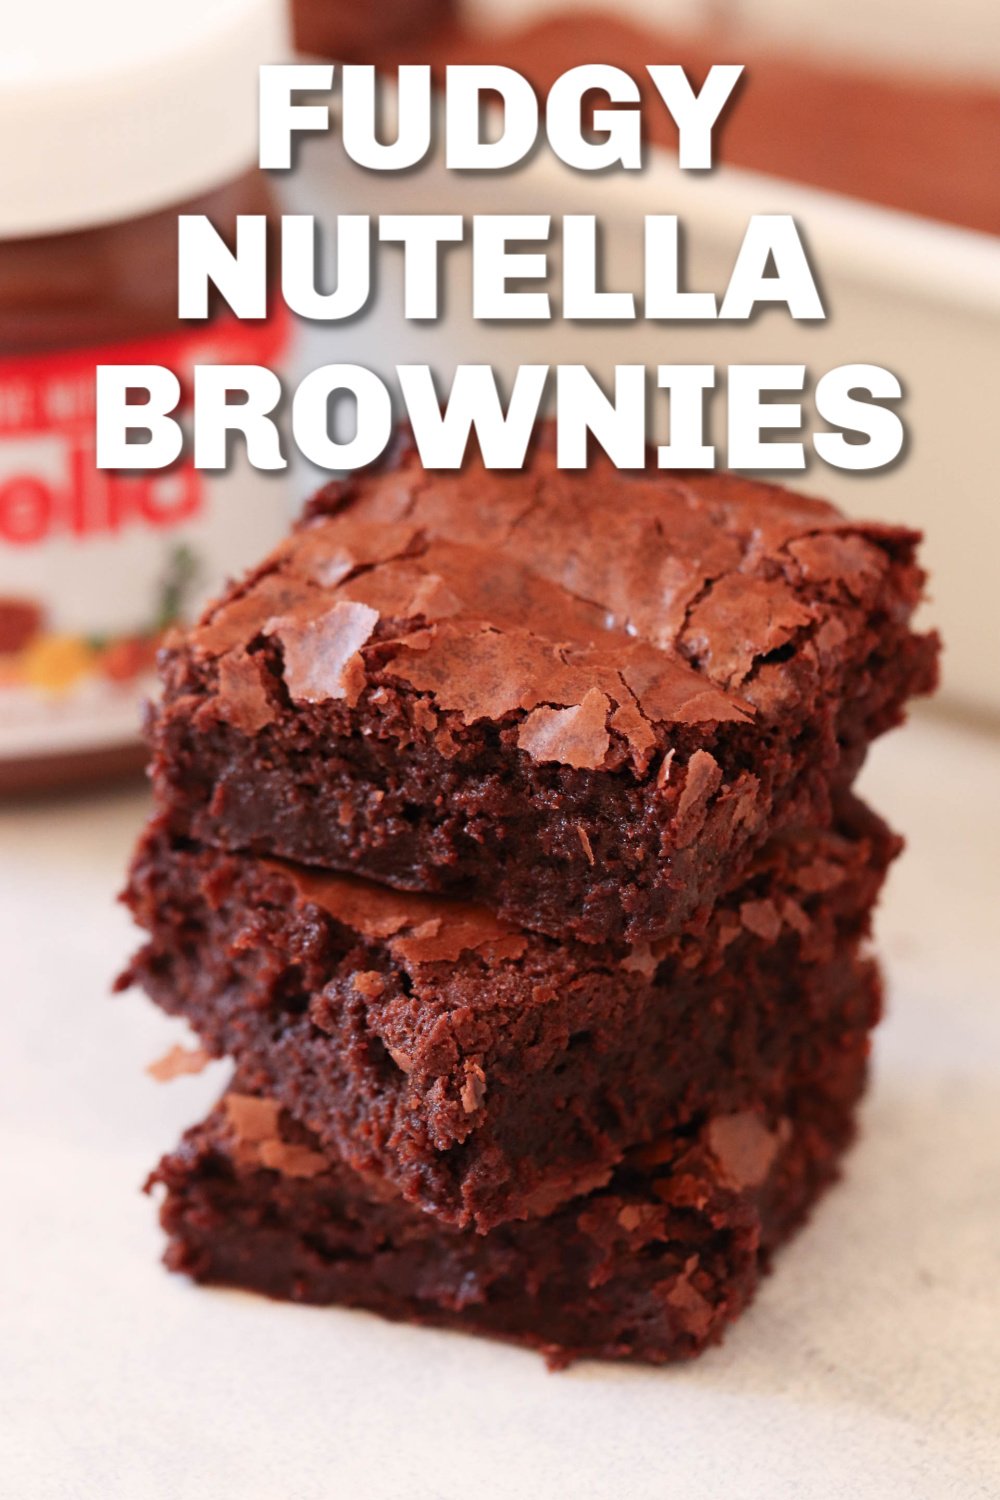 Fudgy Nutella Brownies sliced and stacked